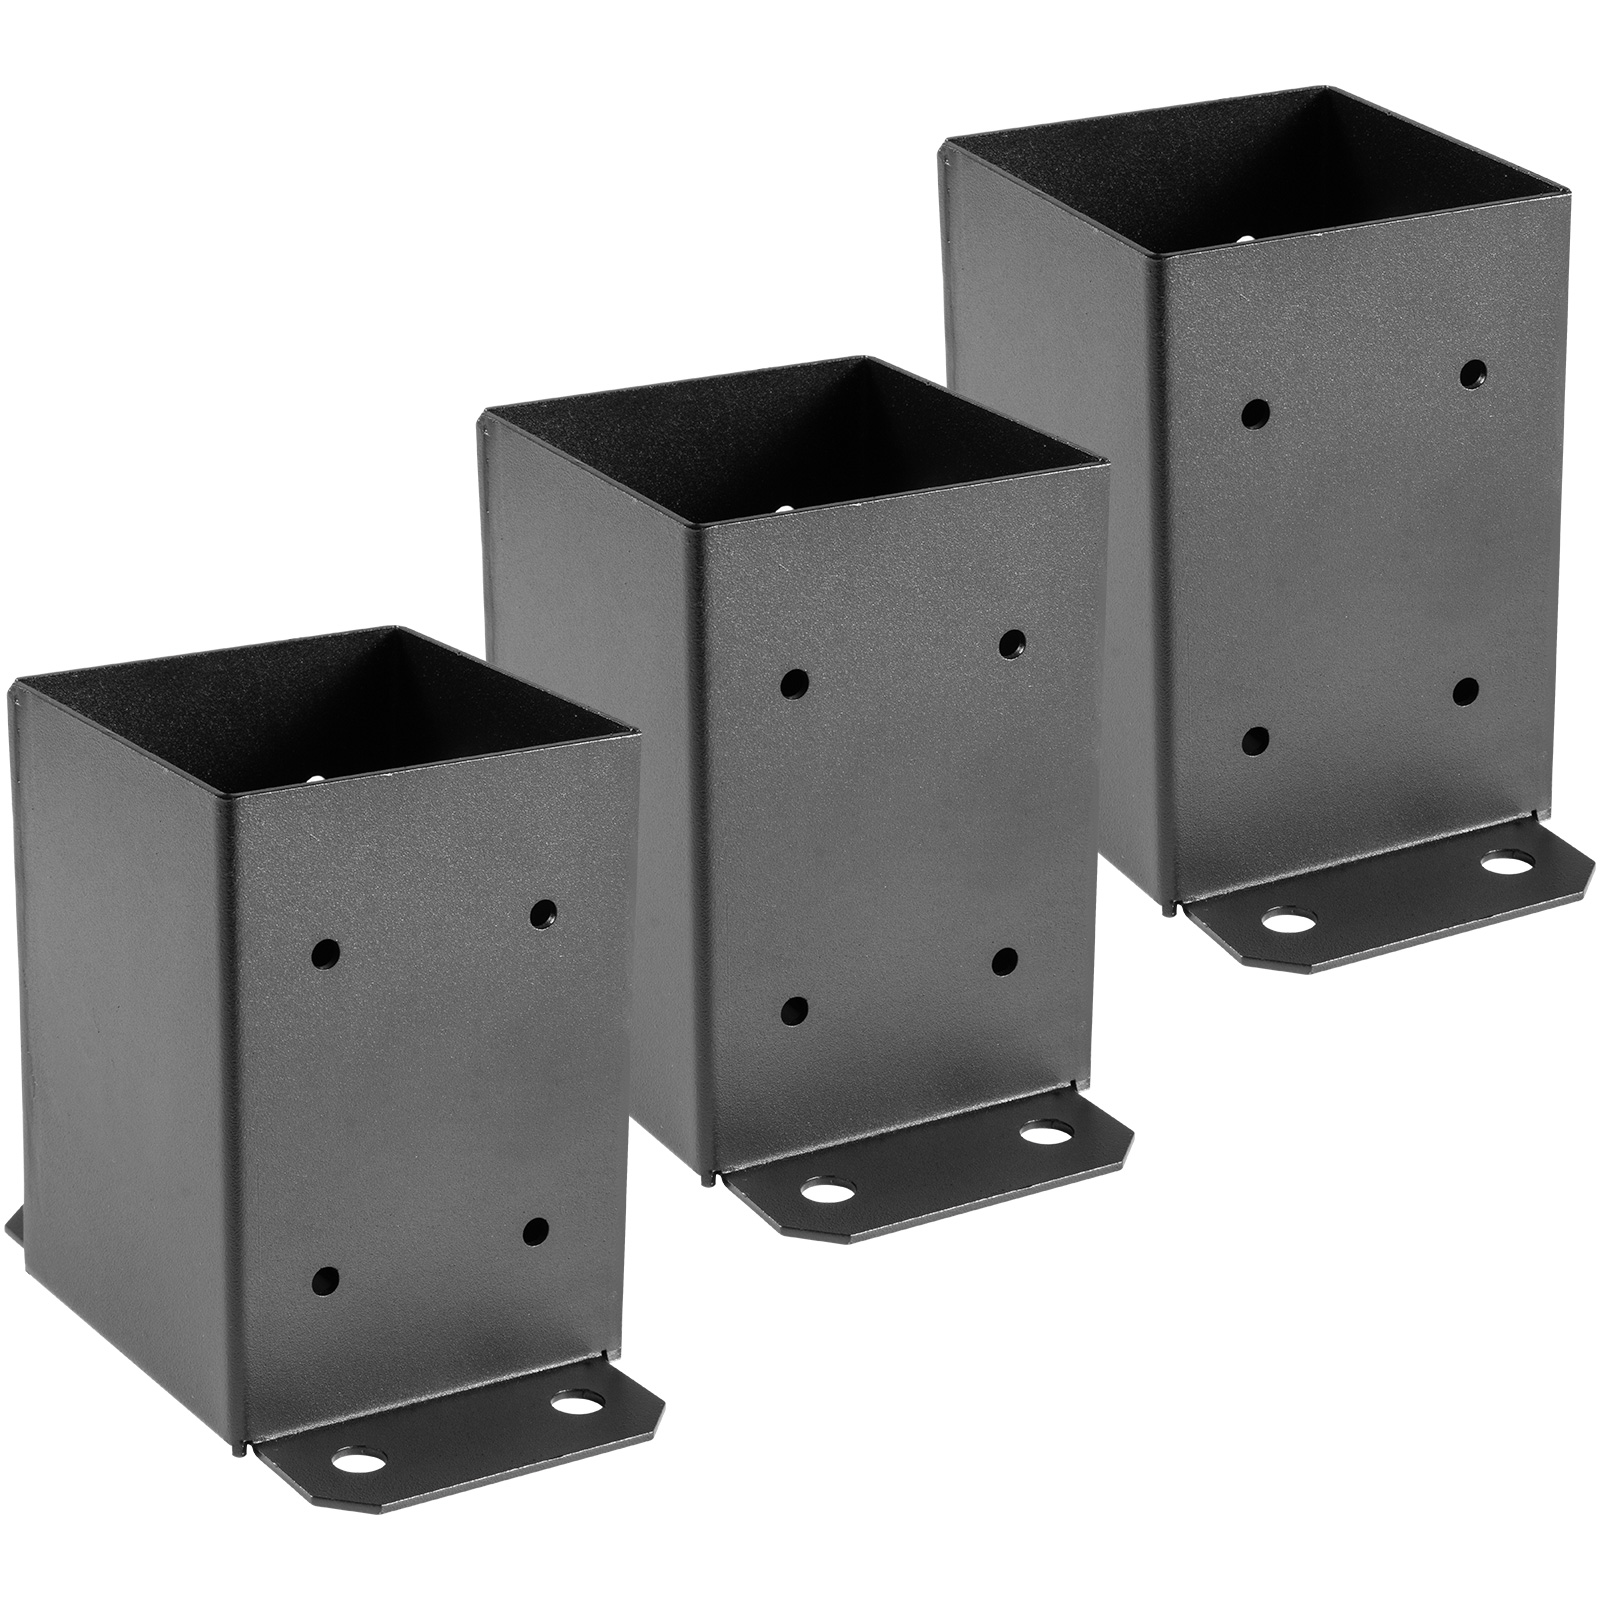 4 x 4 in Fence Post Base 12-Gauge Steel Black Powder Coated Concrete Mounting 